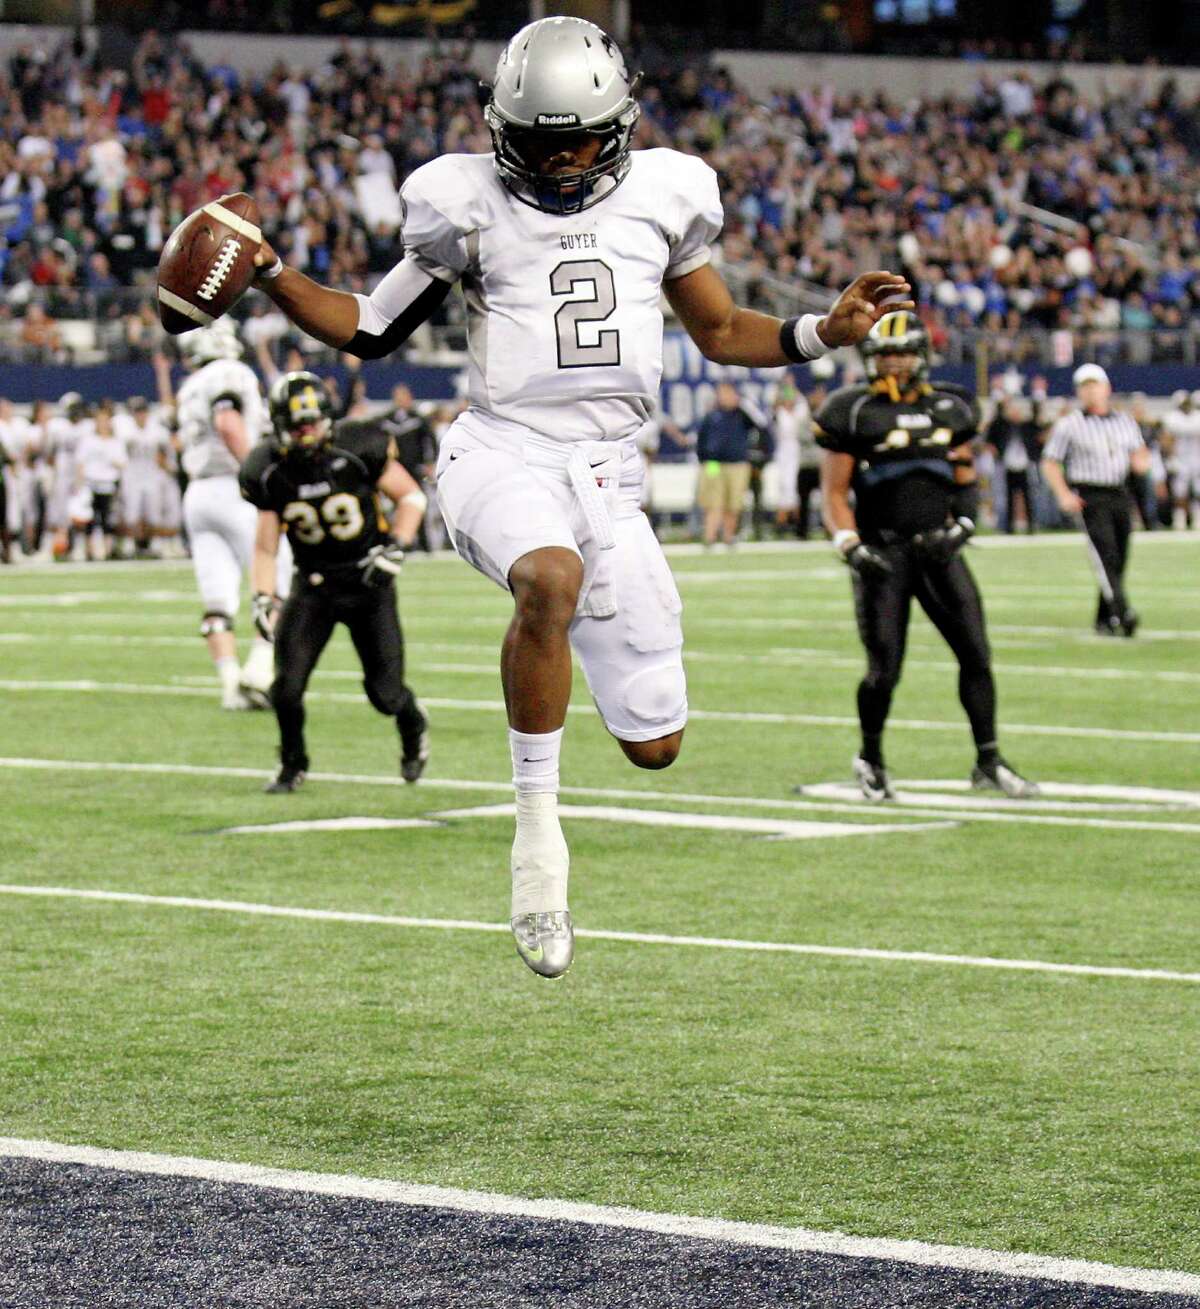 Denton Guyer's Jerrod Heard scores a touchdown against Brennan during first half action of their Class 4A Division I state championship game Friday Dec. 20, 2013 at AT&T Stadium in Arlington, Tx.